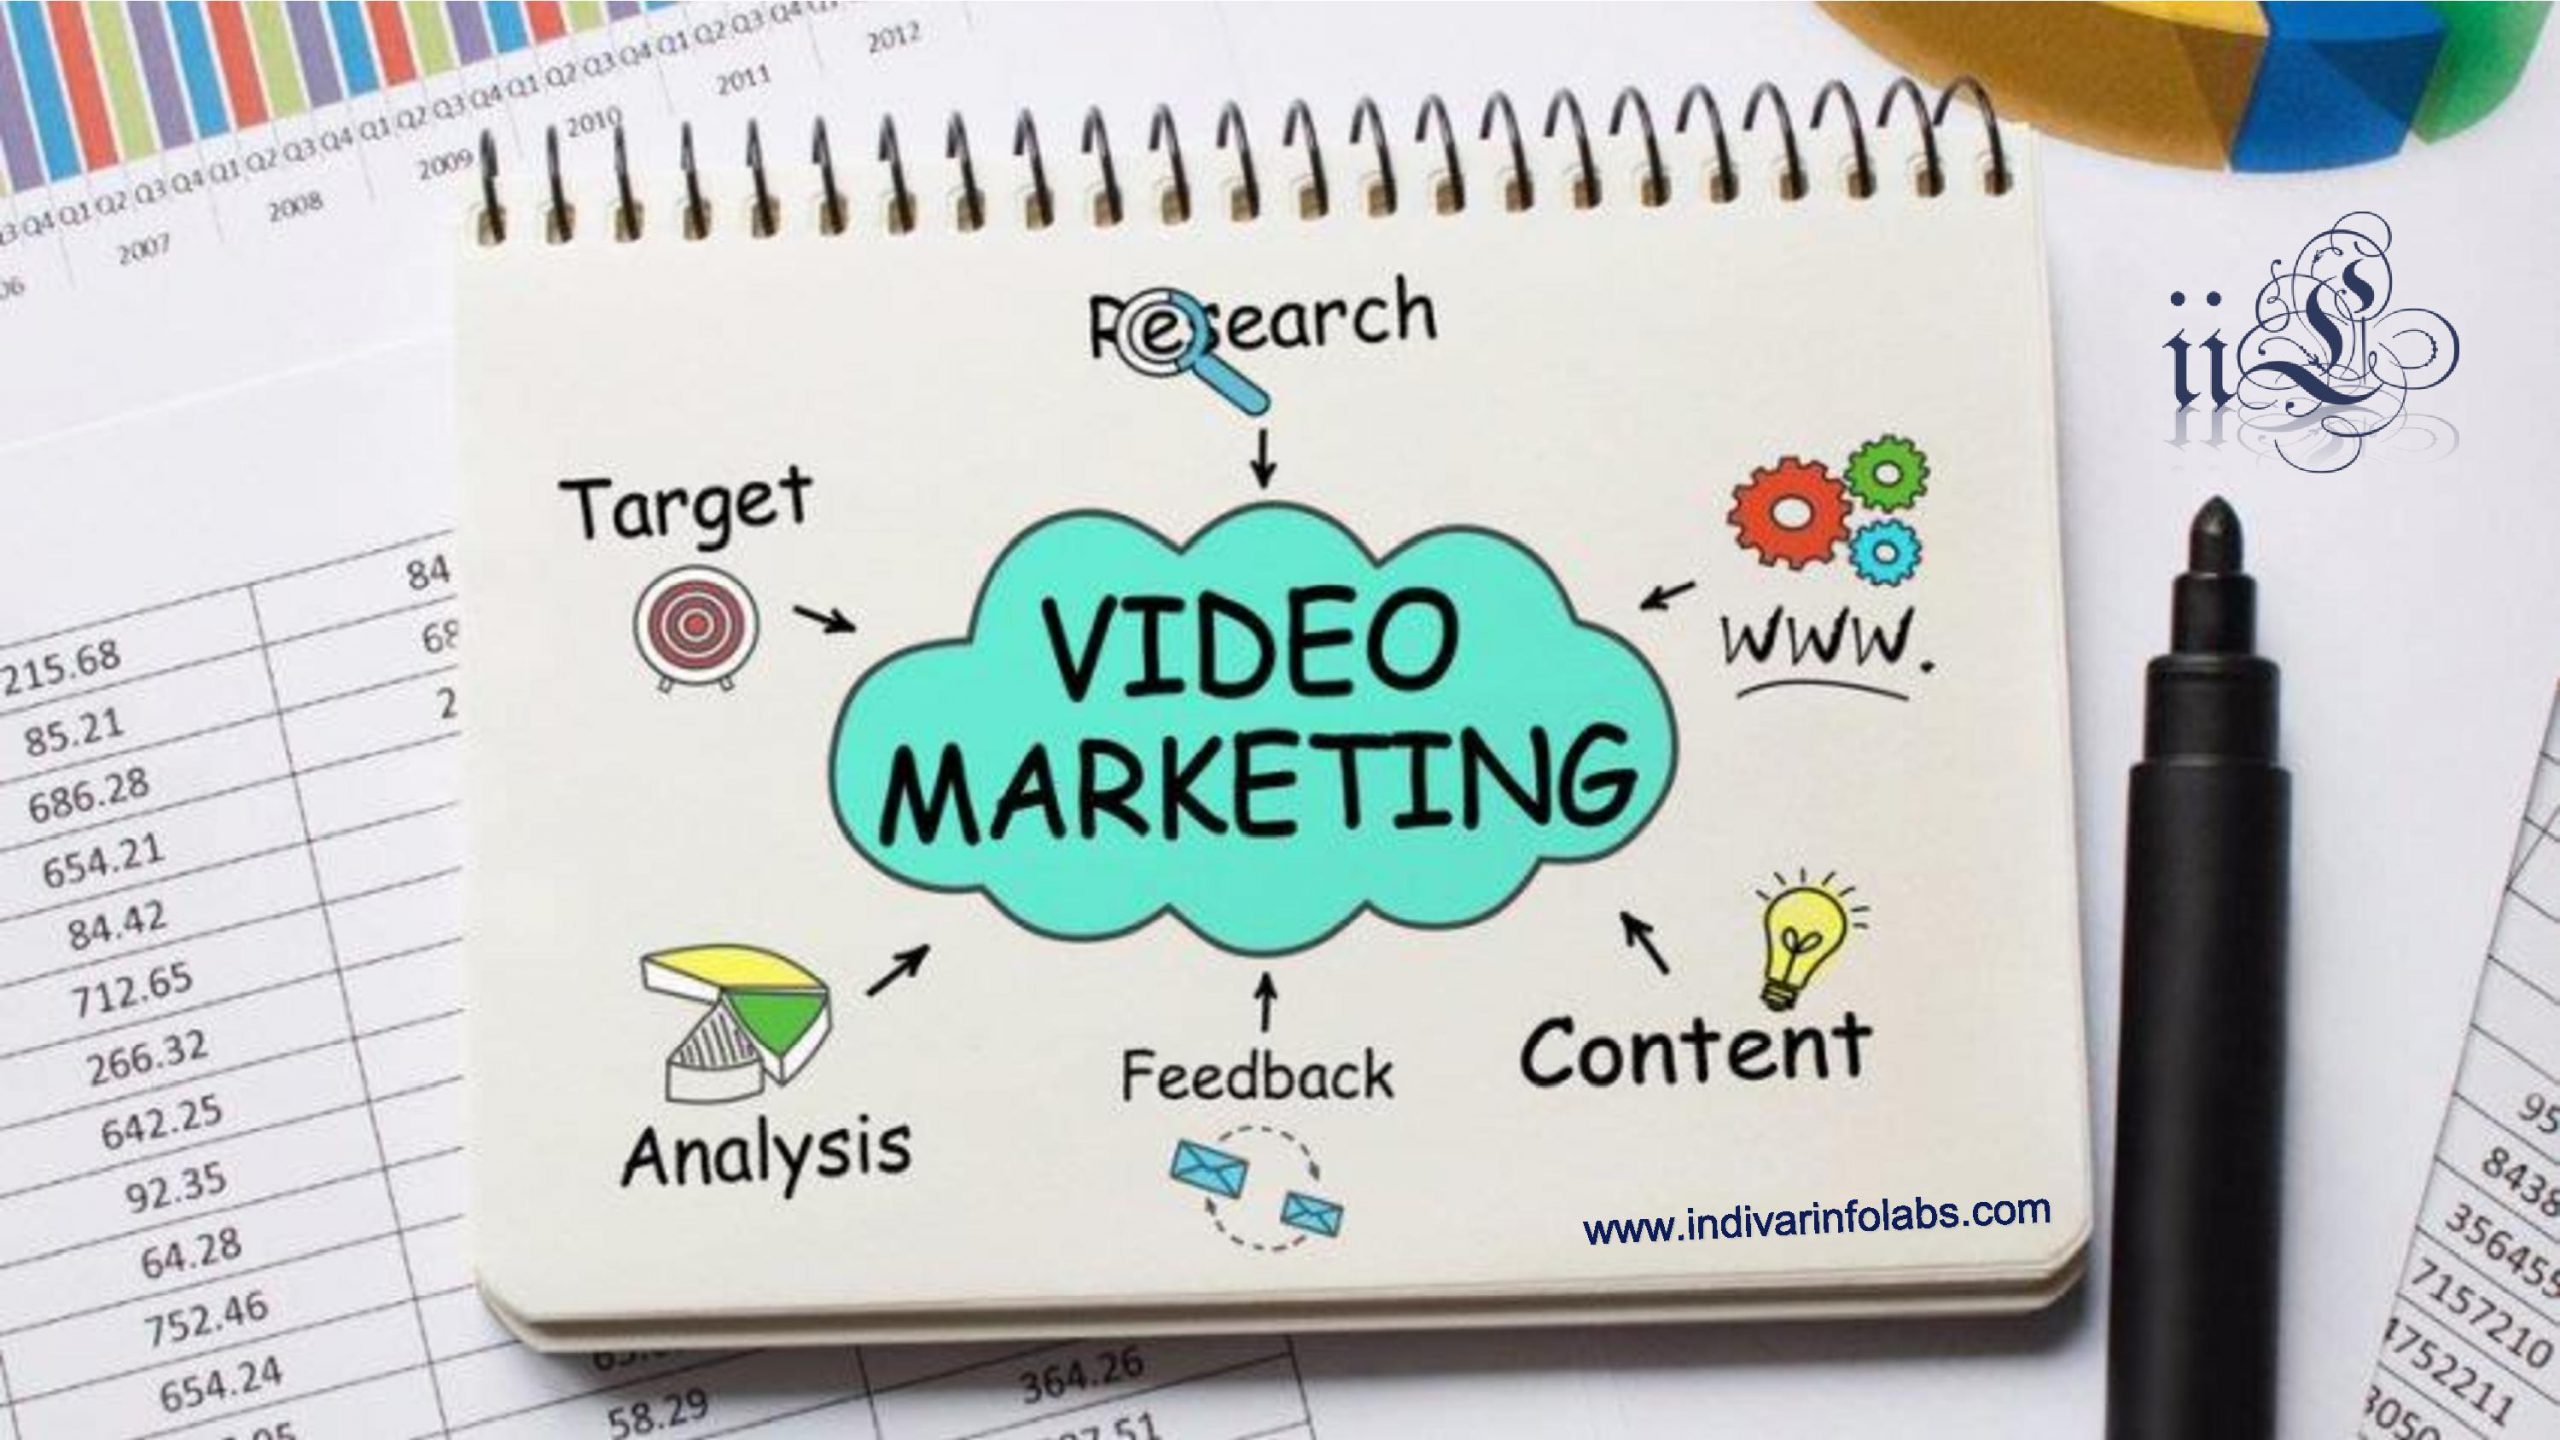 What is the Importance of Video Marketing in today’s ERA?